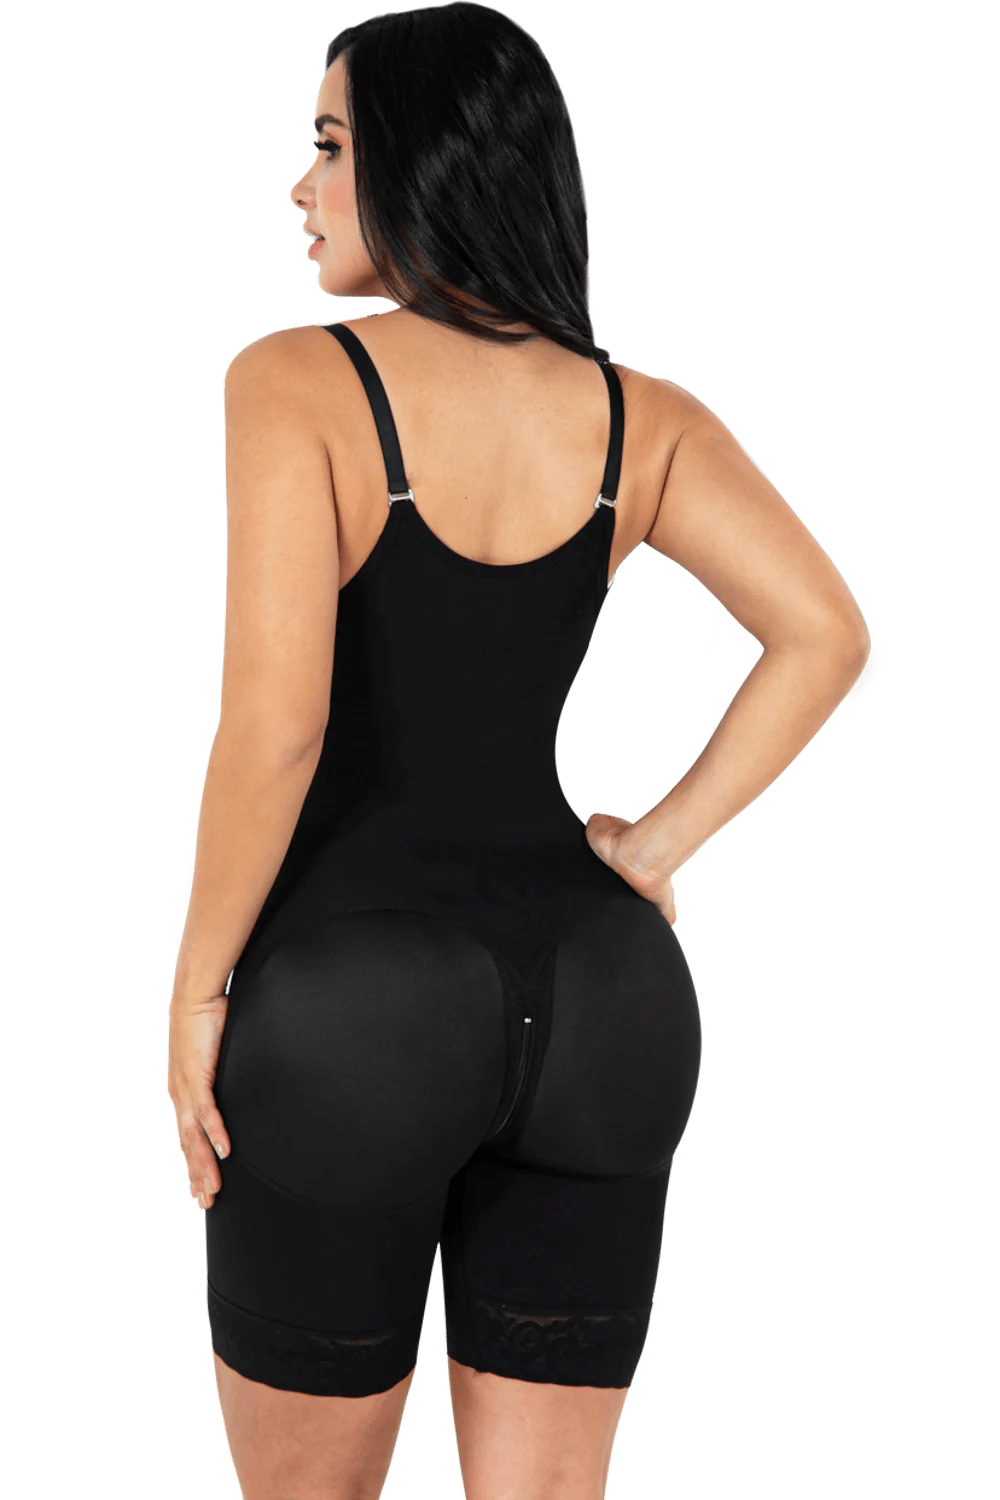 Ily Clothing Shapwear High Back Shorts Bodyshaper with Perineal Zipper